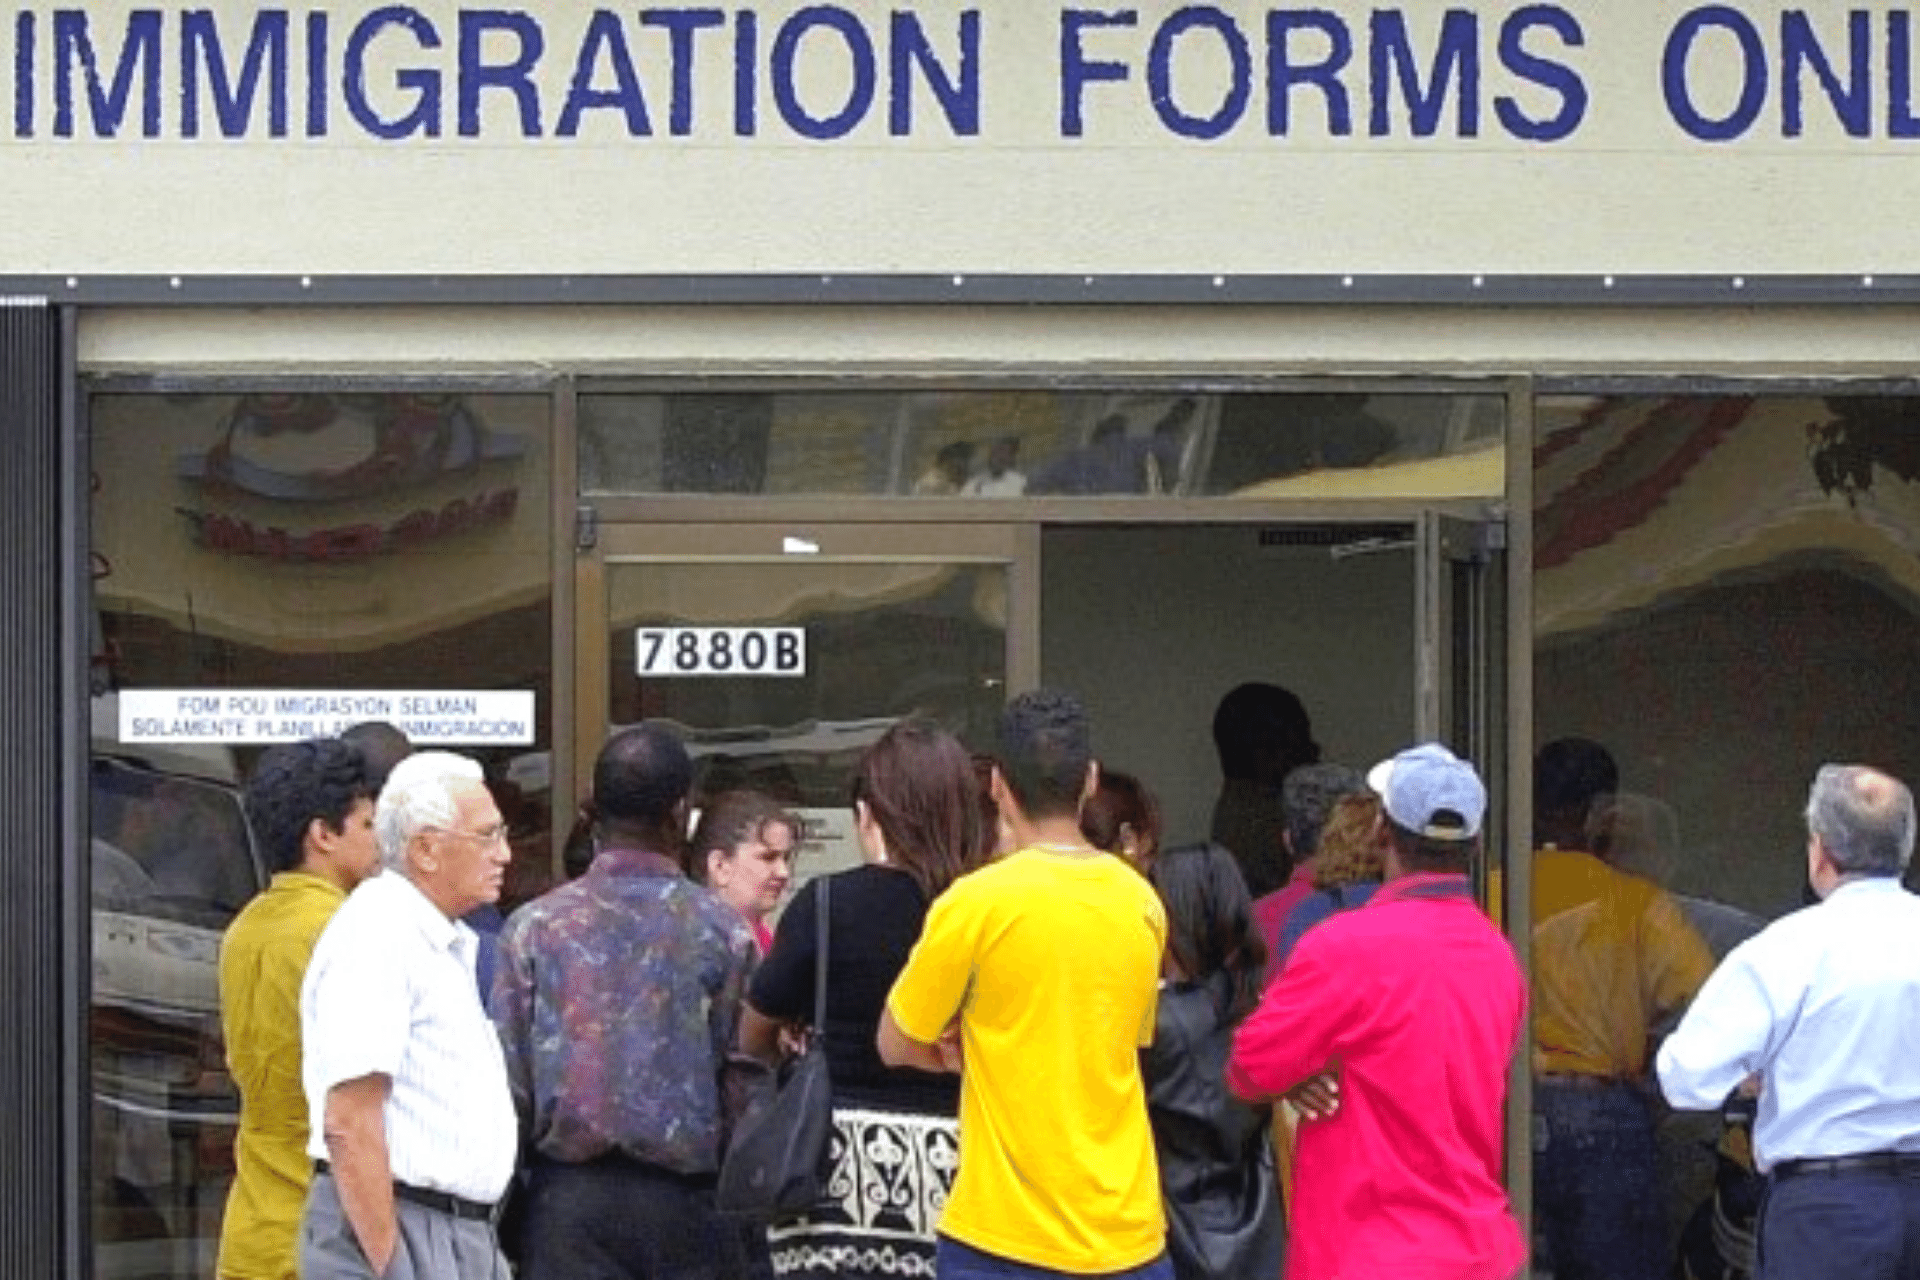 People standing outside a building with a large sign stating, "Immigration Forms Only".